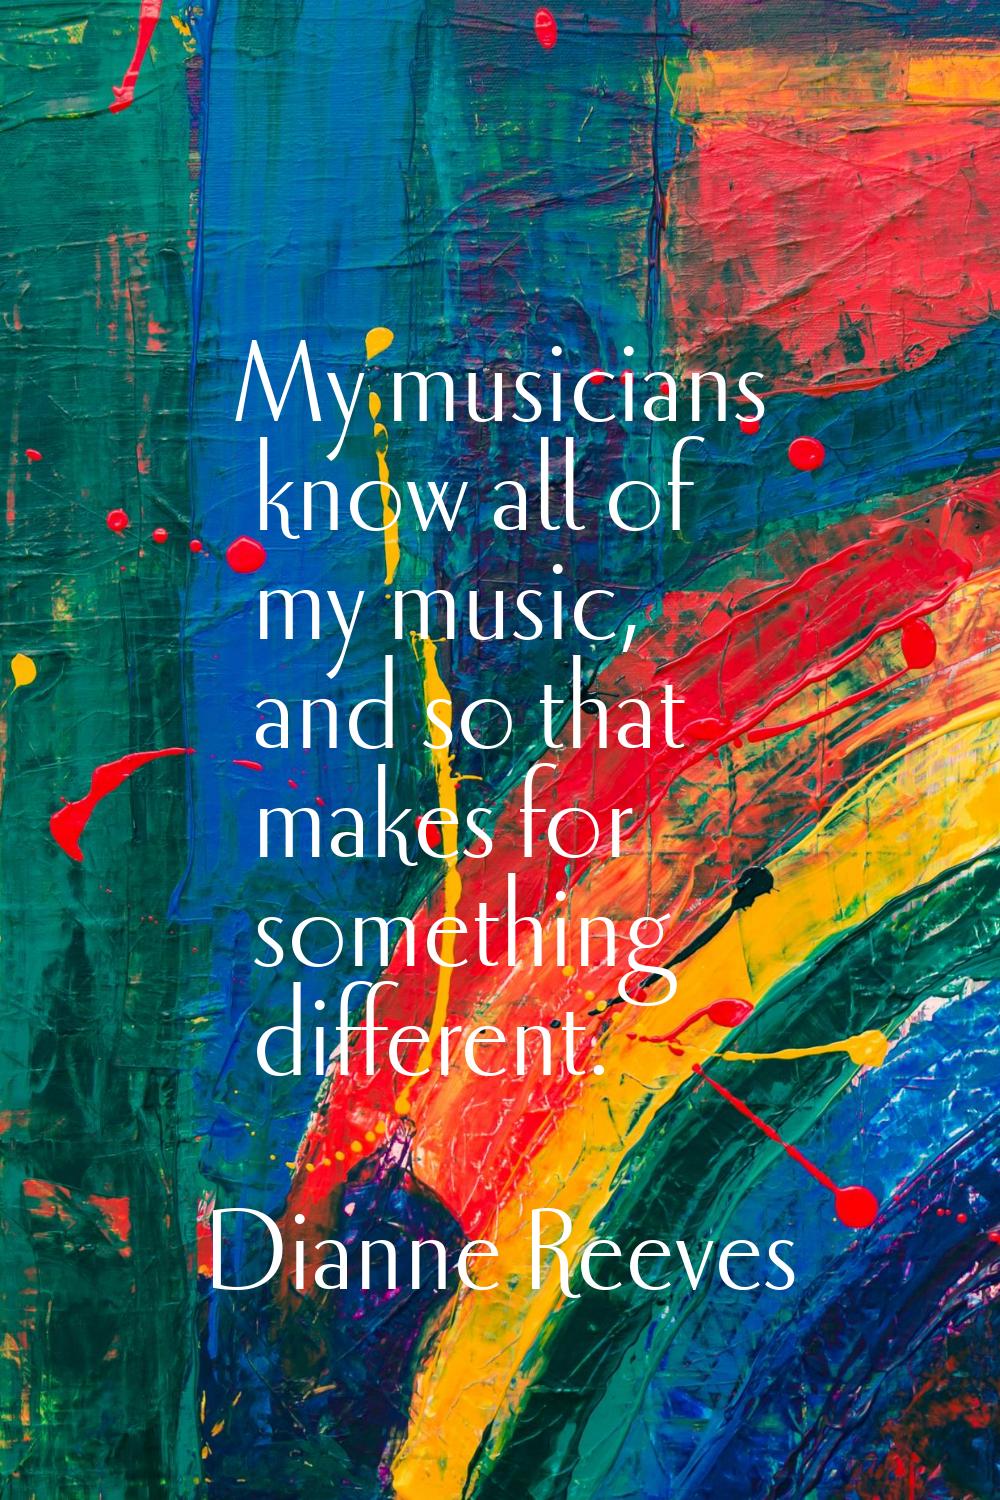 My musicians know all of my music, and so that makes for something different.